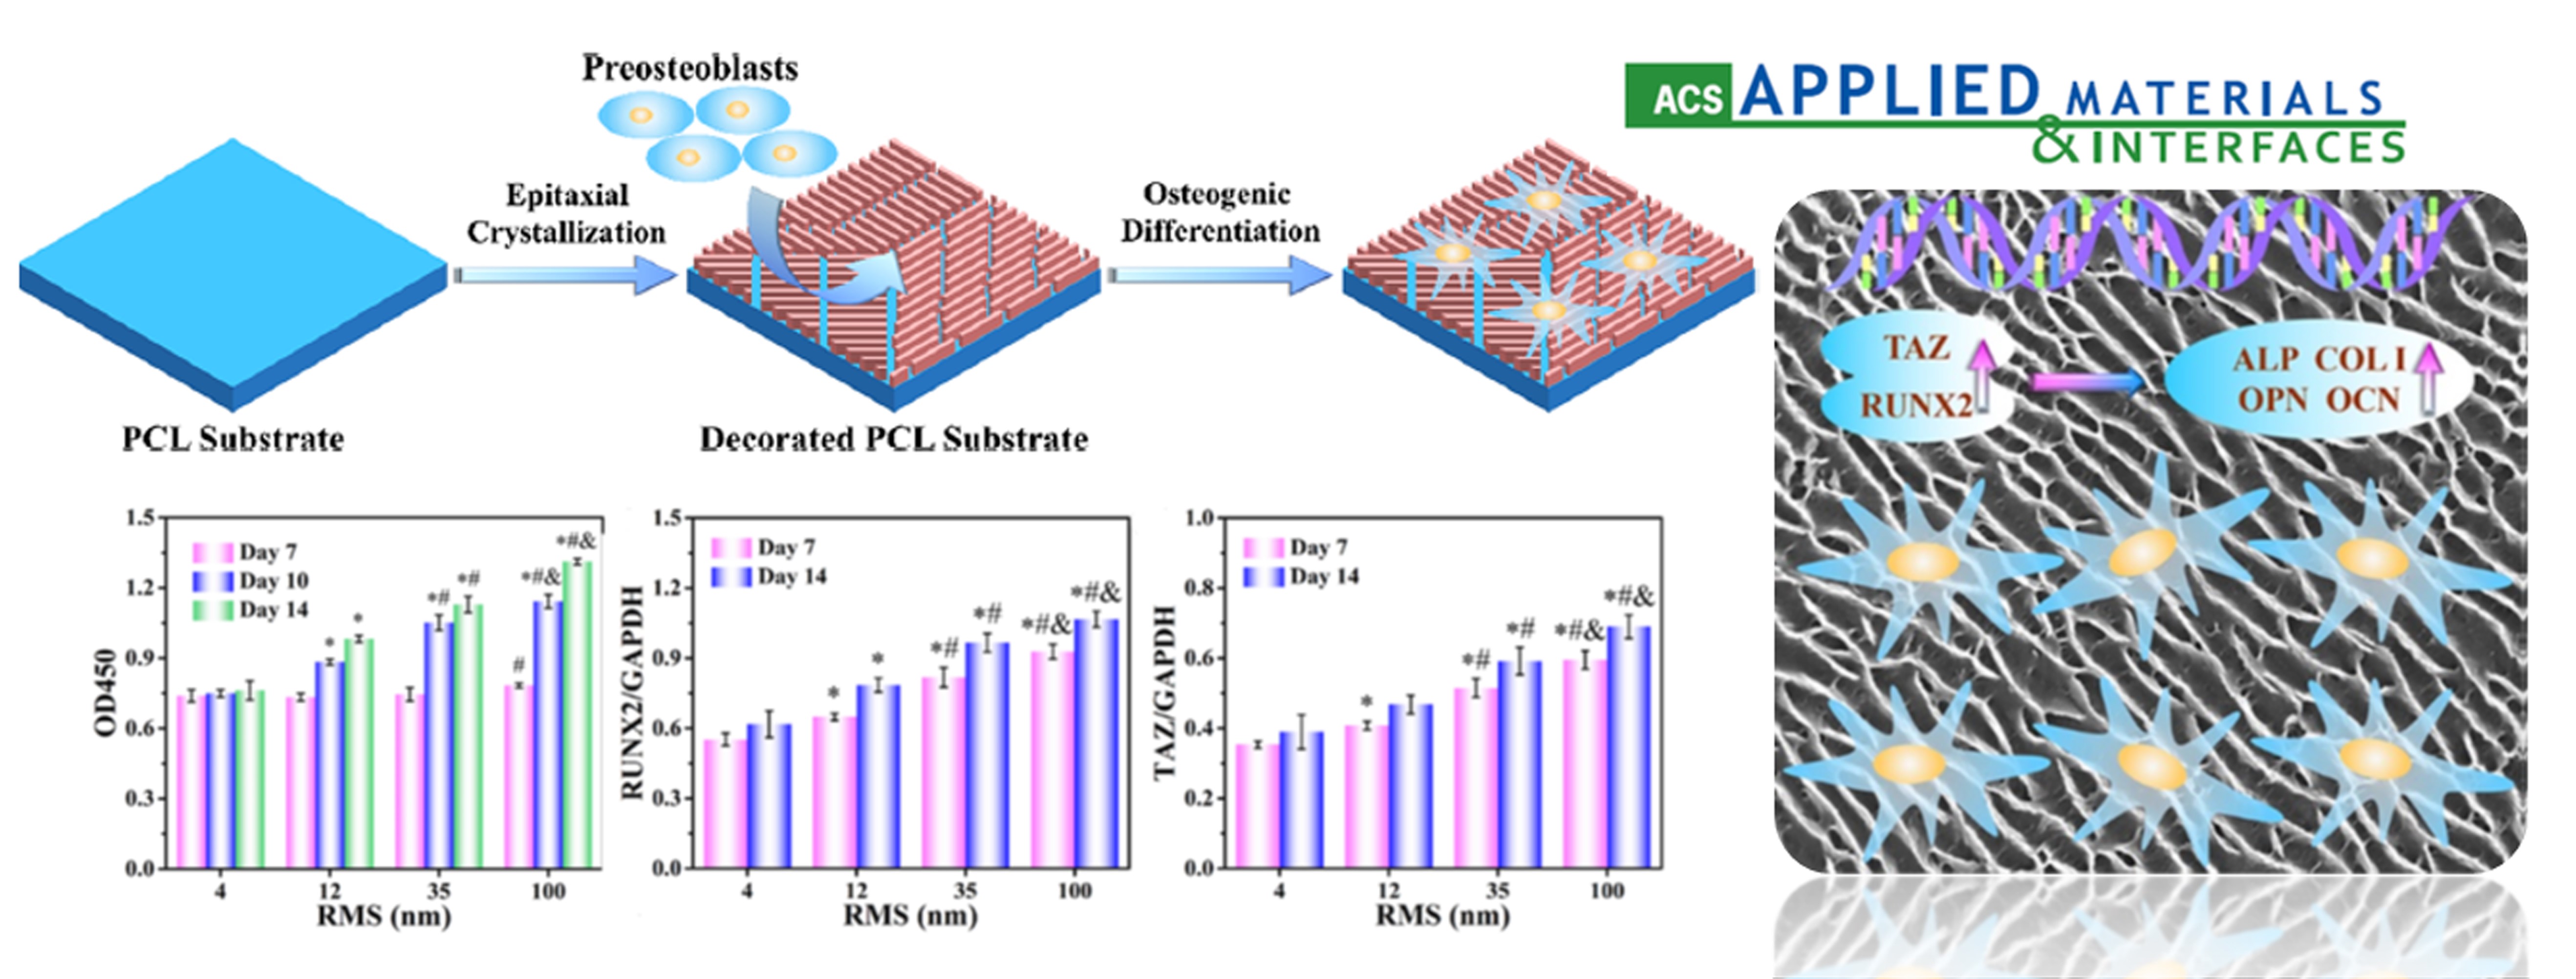 Surface Epitaxial Crystallization-Directed Nanotopography for Accelerating Preosteoblast Proliferation and Osteogenic Differentiation.